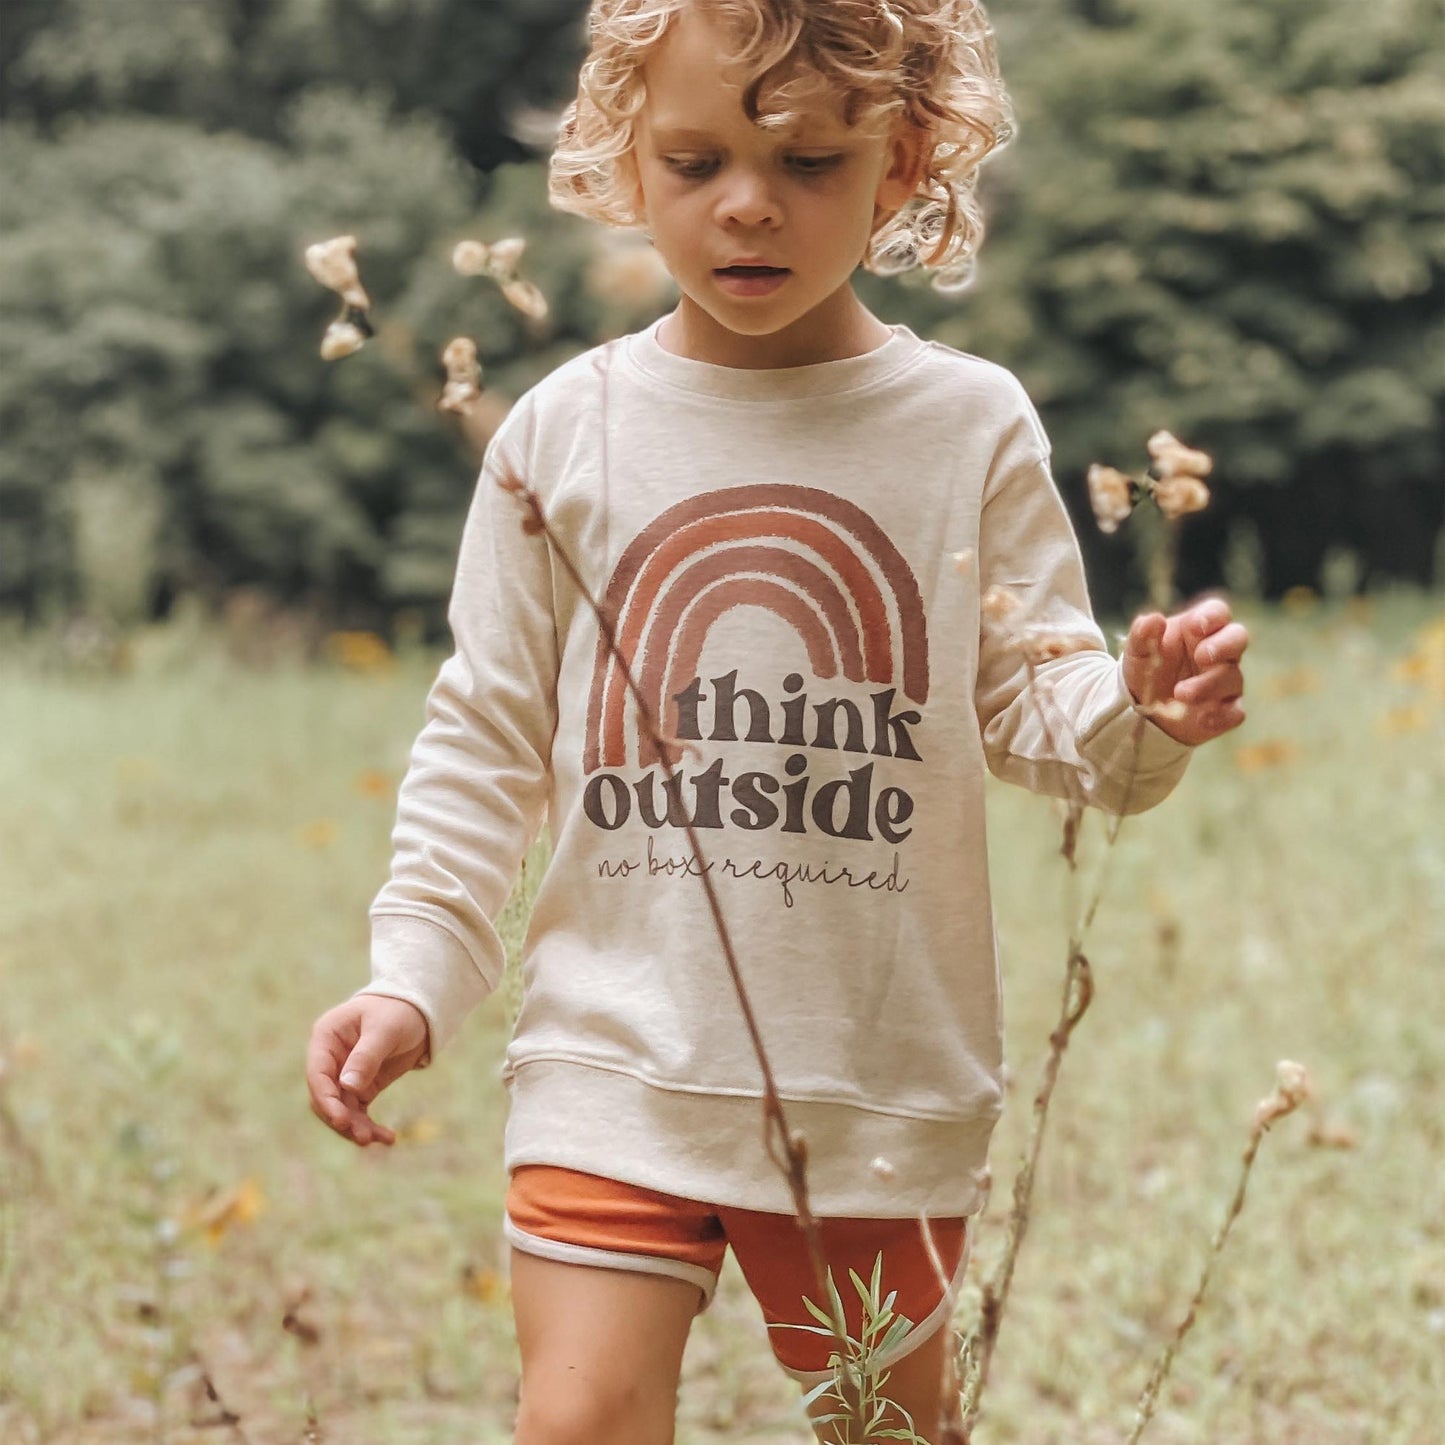 "Think outside no box required" Toddler Pullover